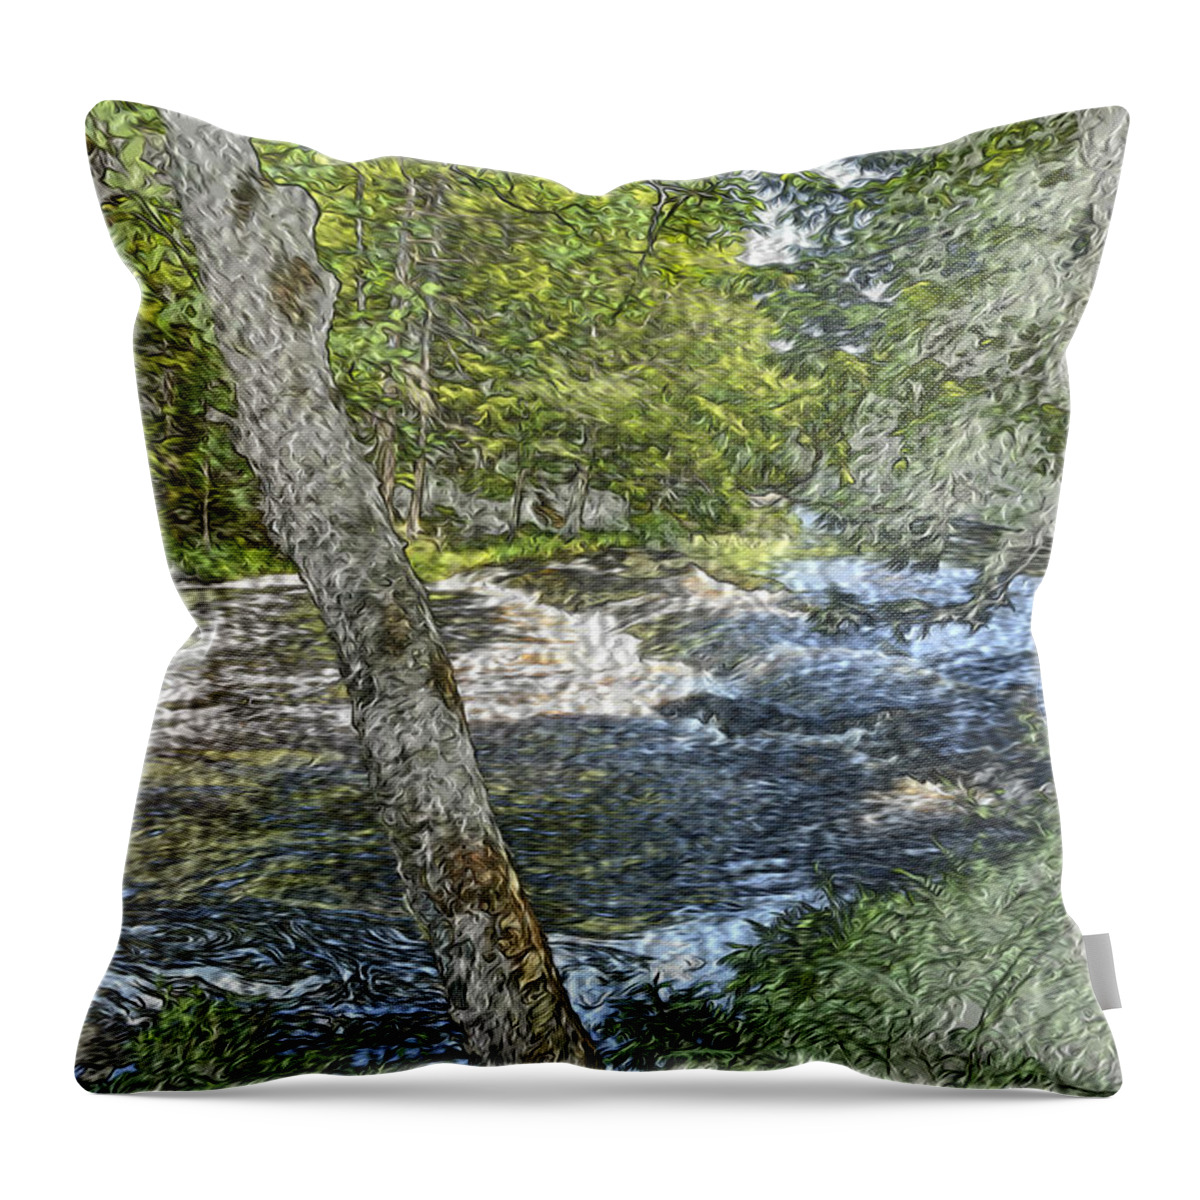 Mountain Throw Pillow featuring the photograph Painted Mountain Stream by Will Burlingham